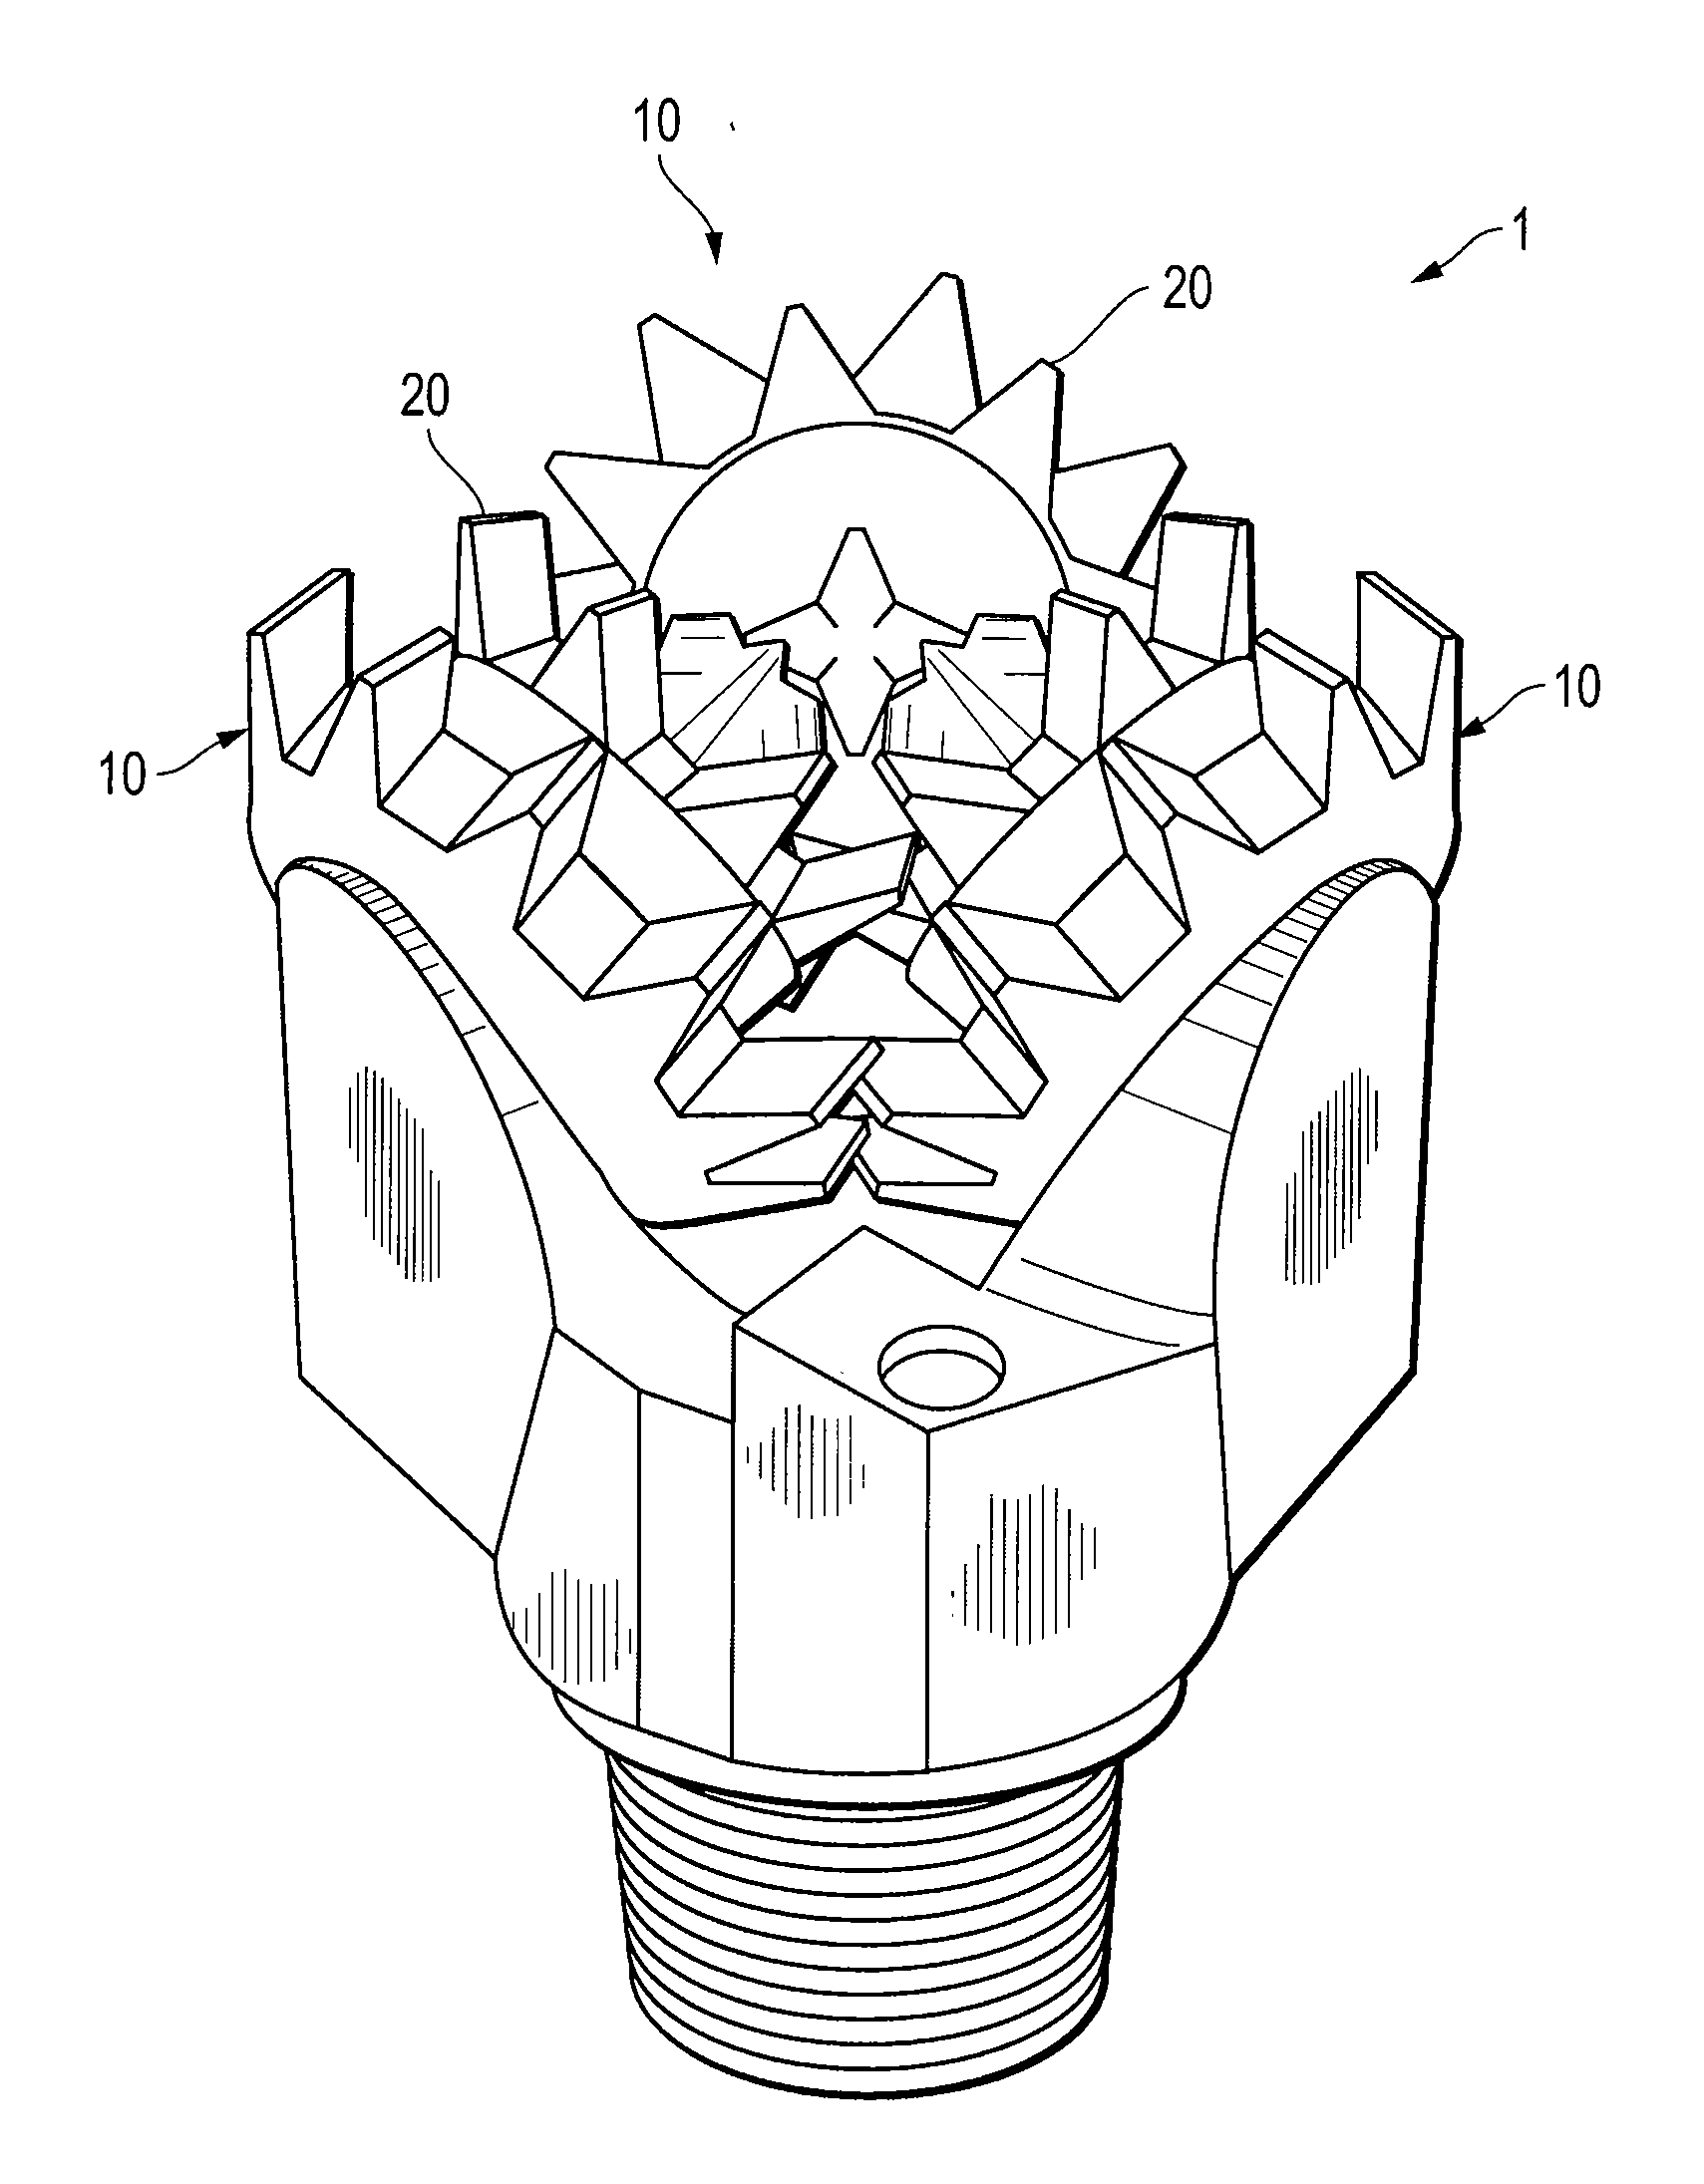 Method and apparatus for automated application of hardfacing material to rolling cutters of hybrid-type earth boring drill bits, hybrid drill bits comprising such hardfaced steel-toothed cutting elements, and methods of use thereof